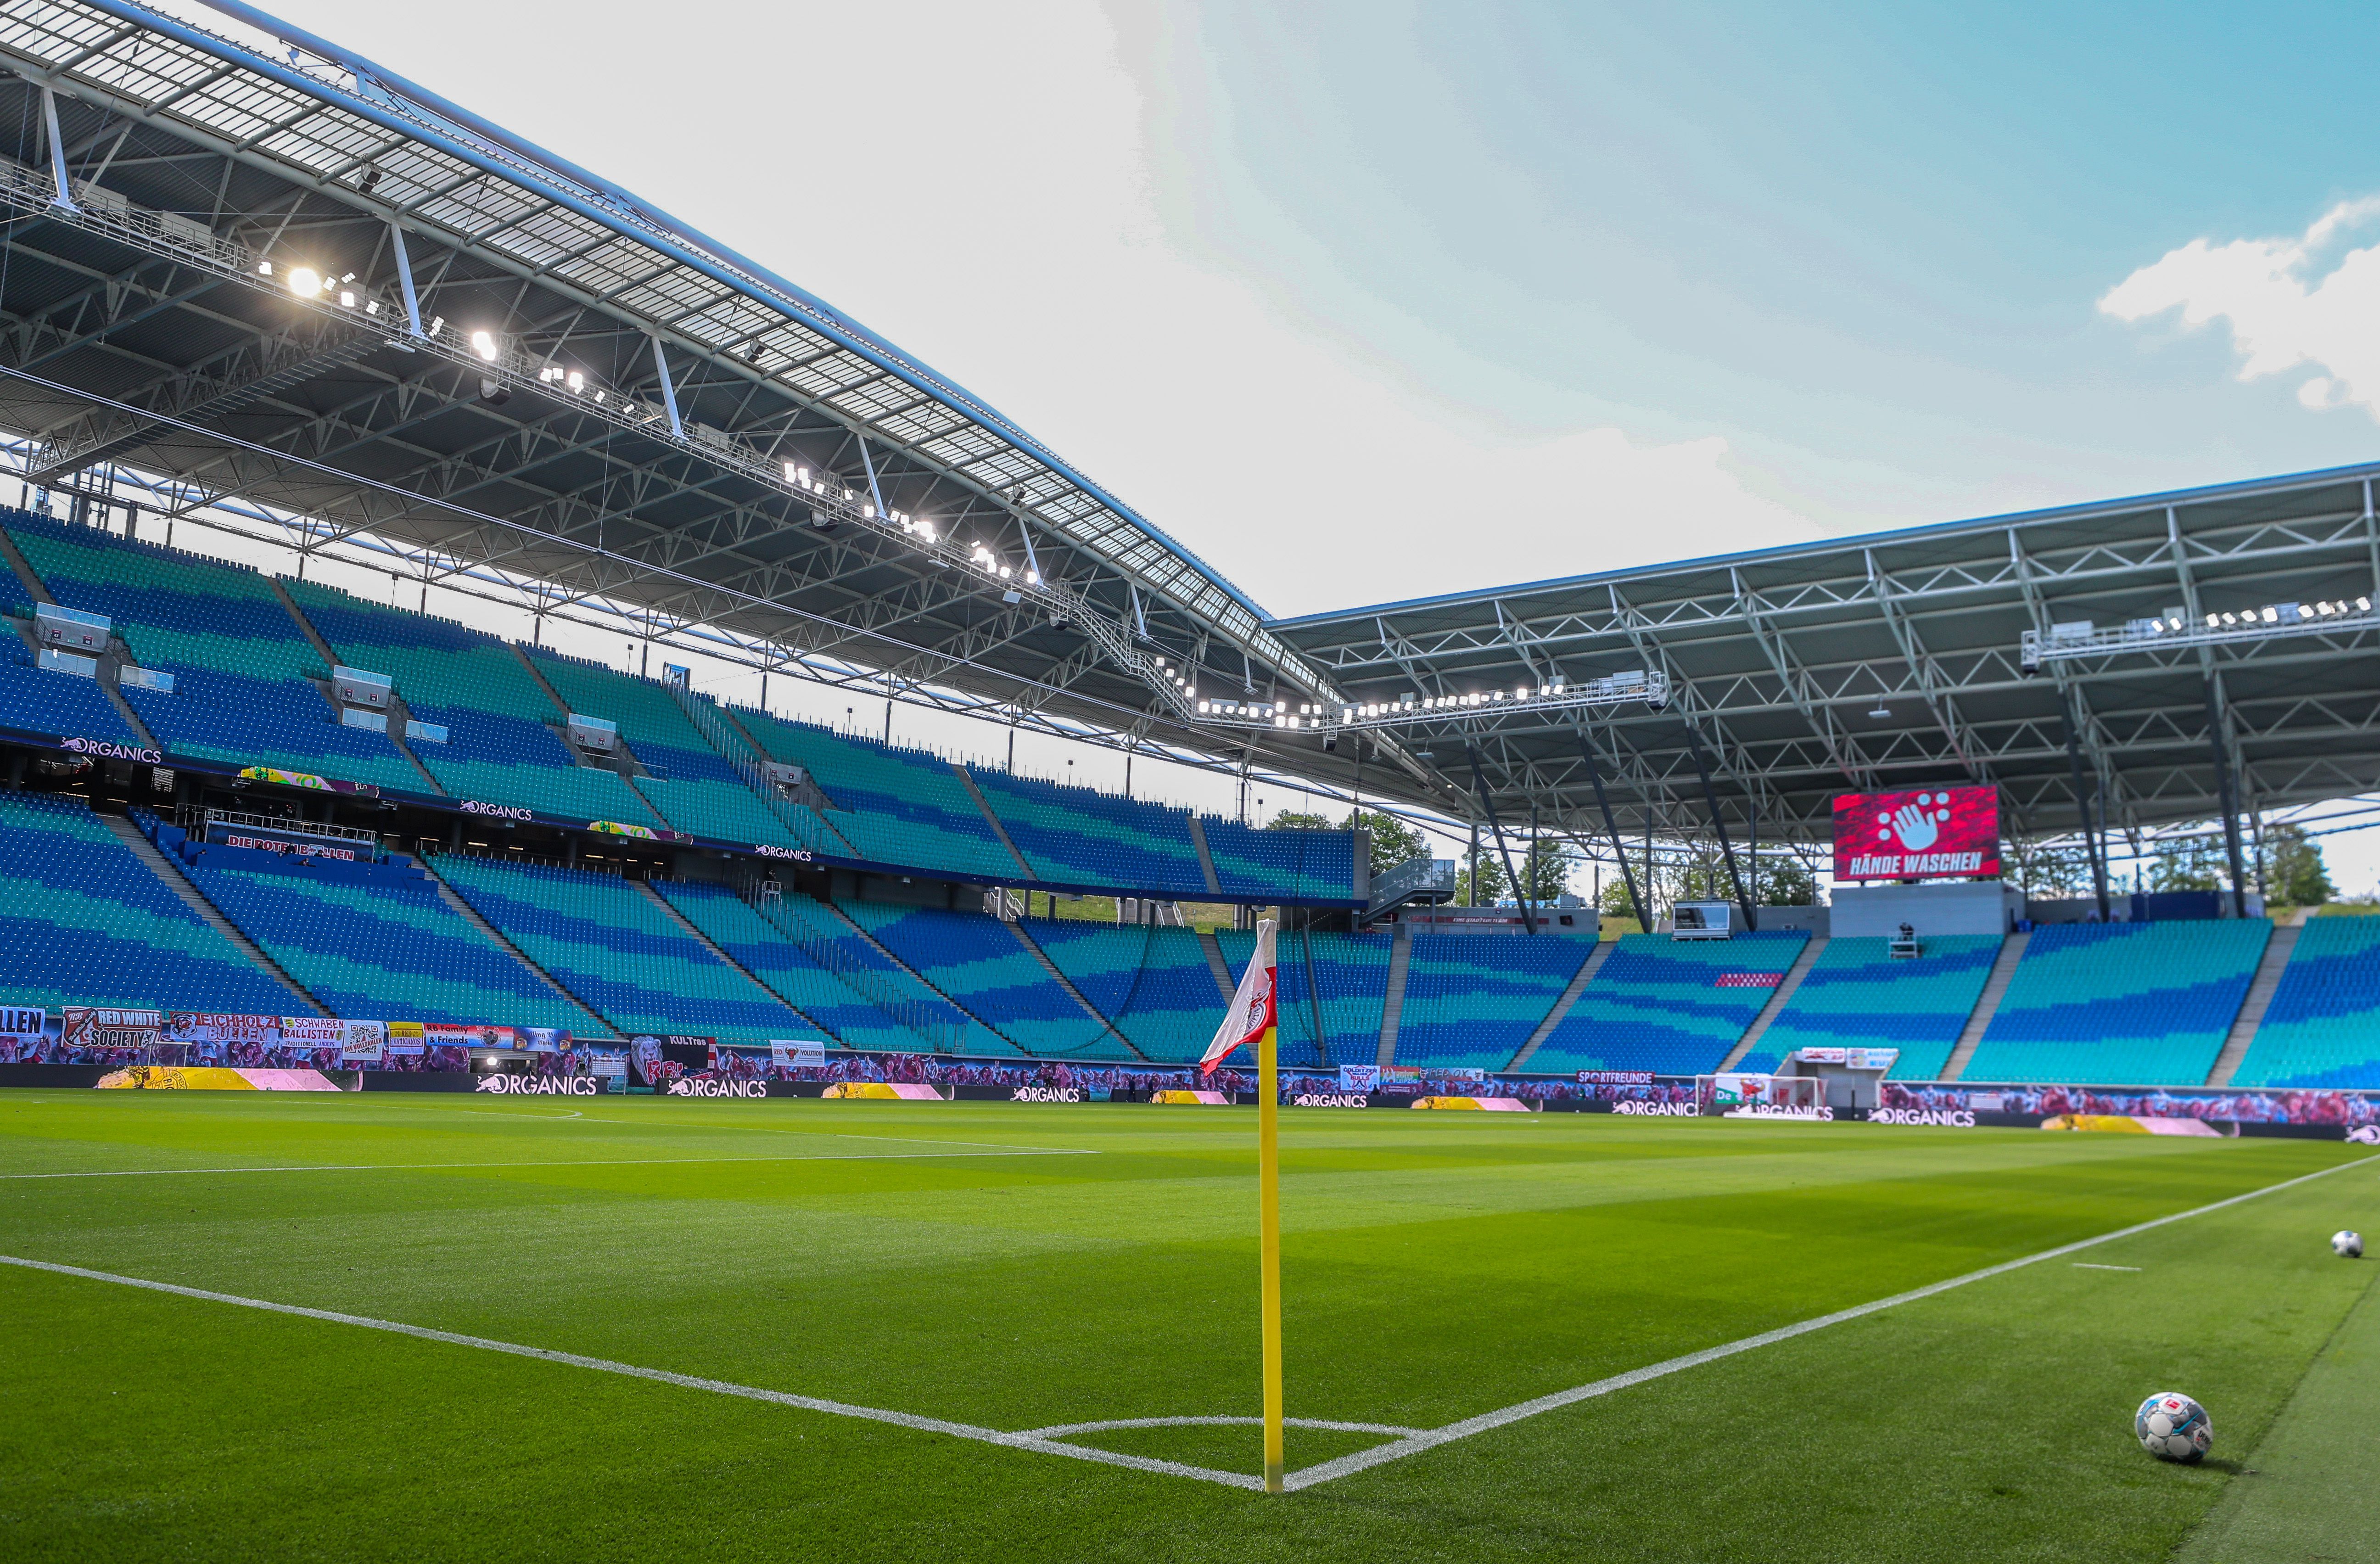 General view of the Red Bull Arena